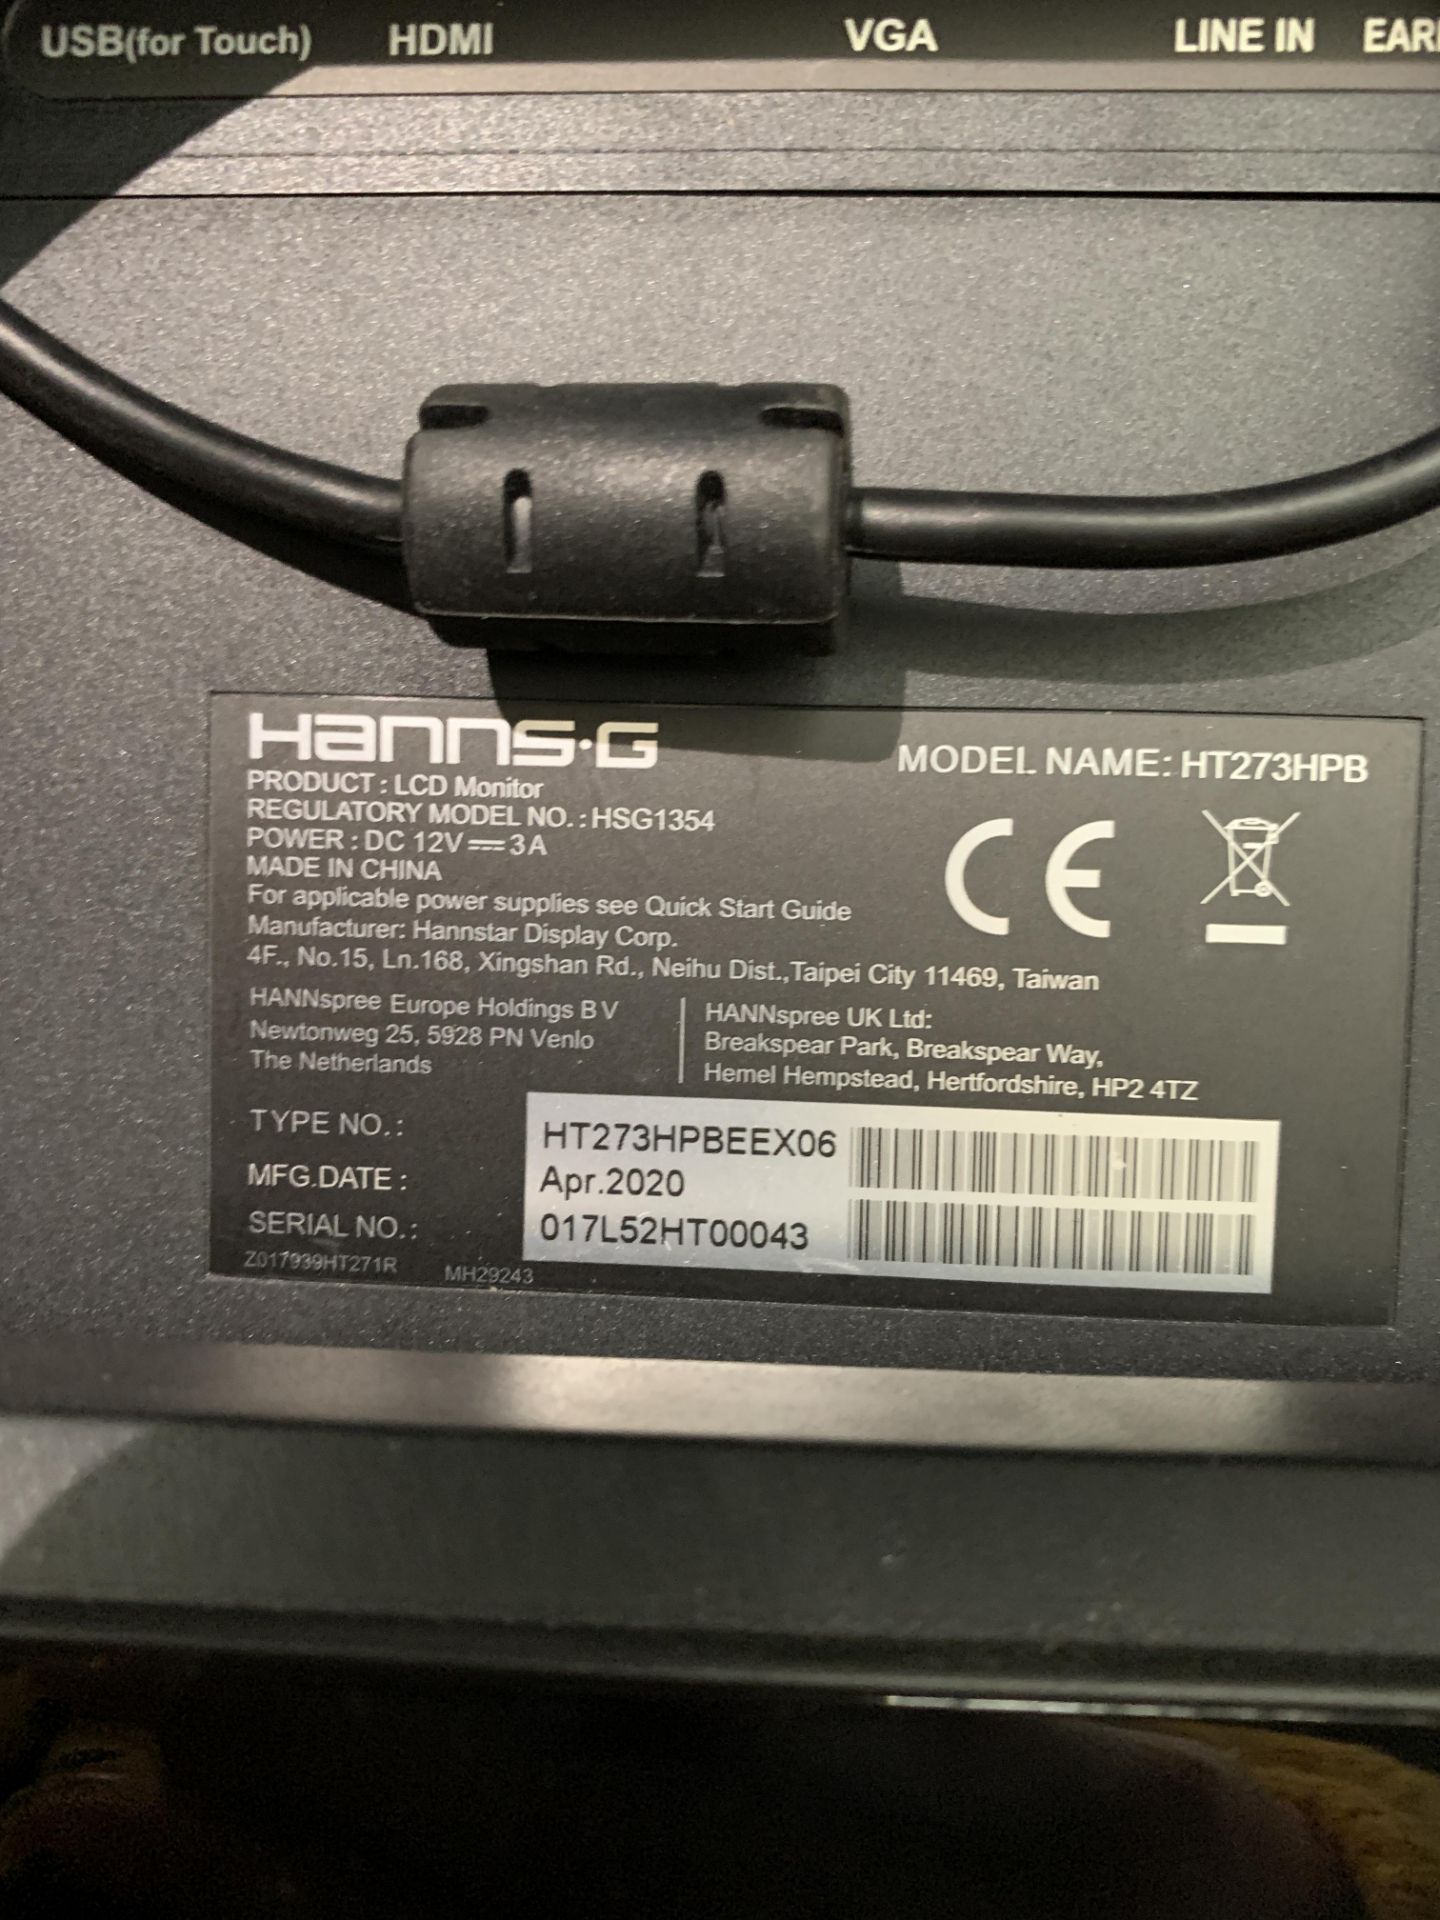 A Hanns G by Hannspree HP273 27" LCD monitor - Image 2 of 4